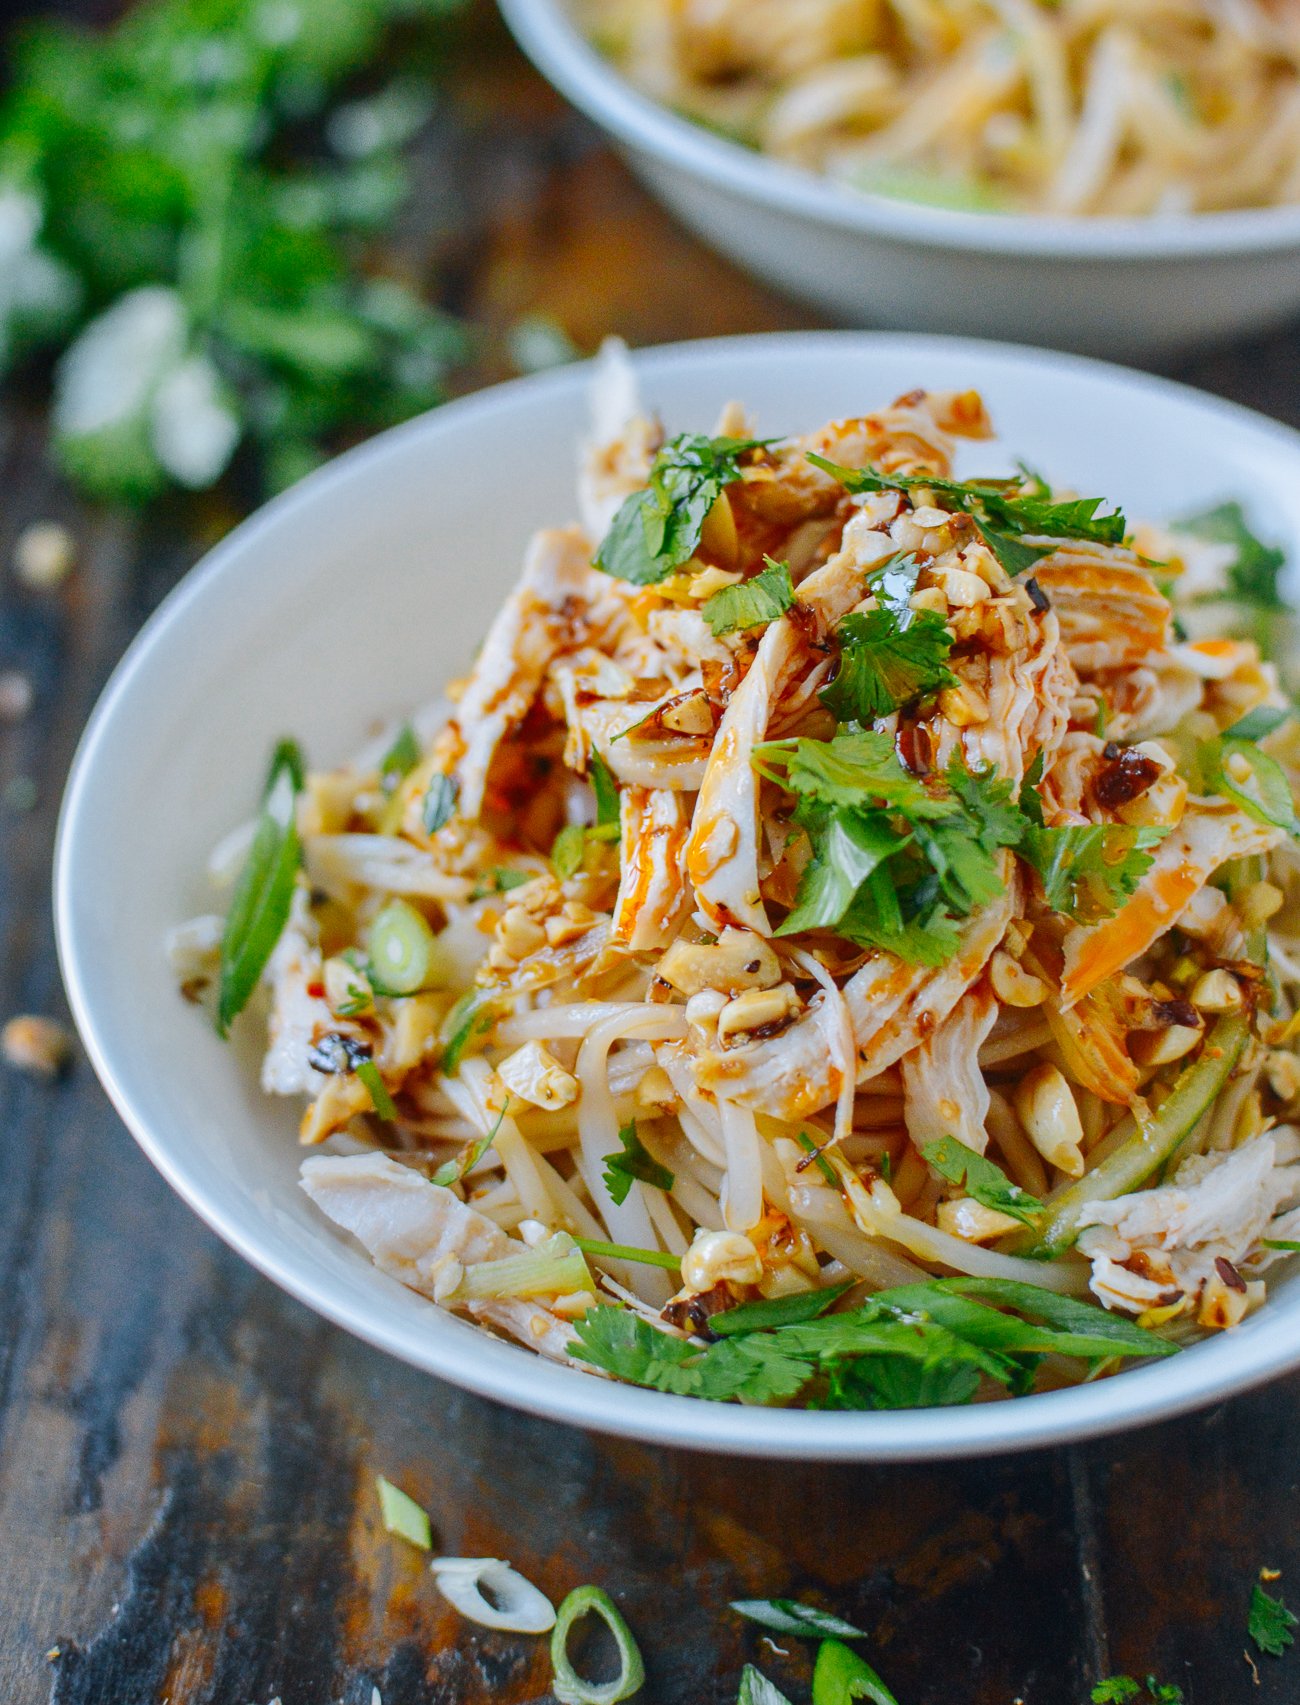 Bowl of Chinese cold noodles with shredded chicken